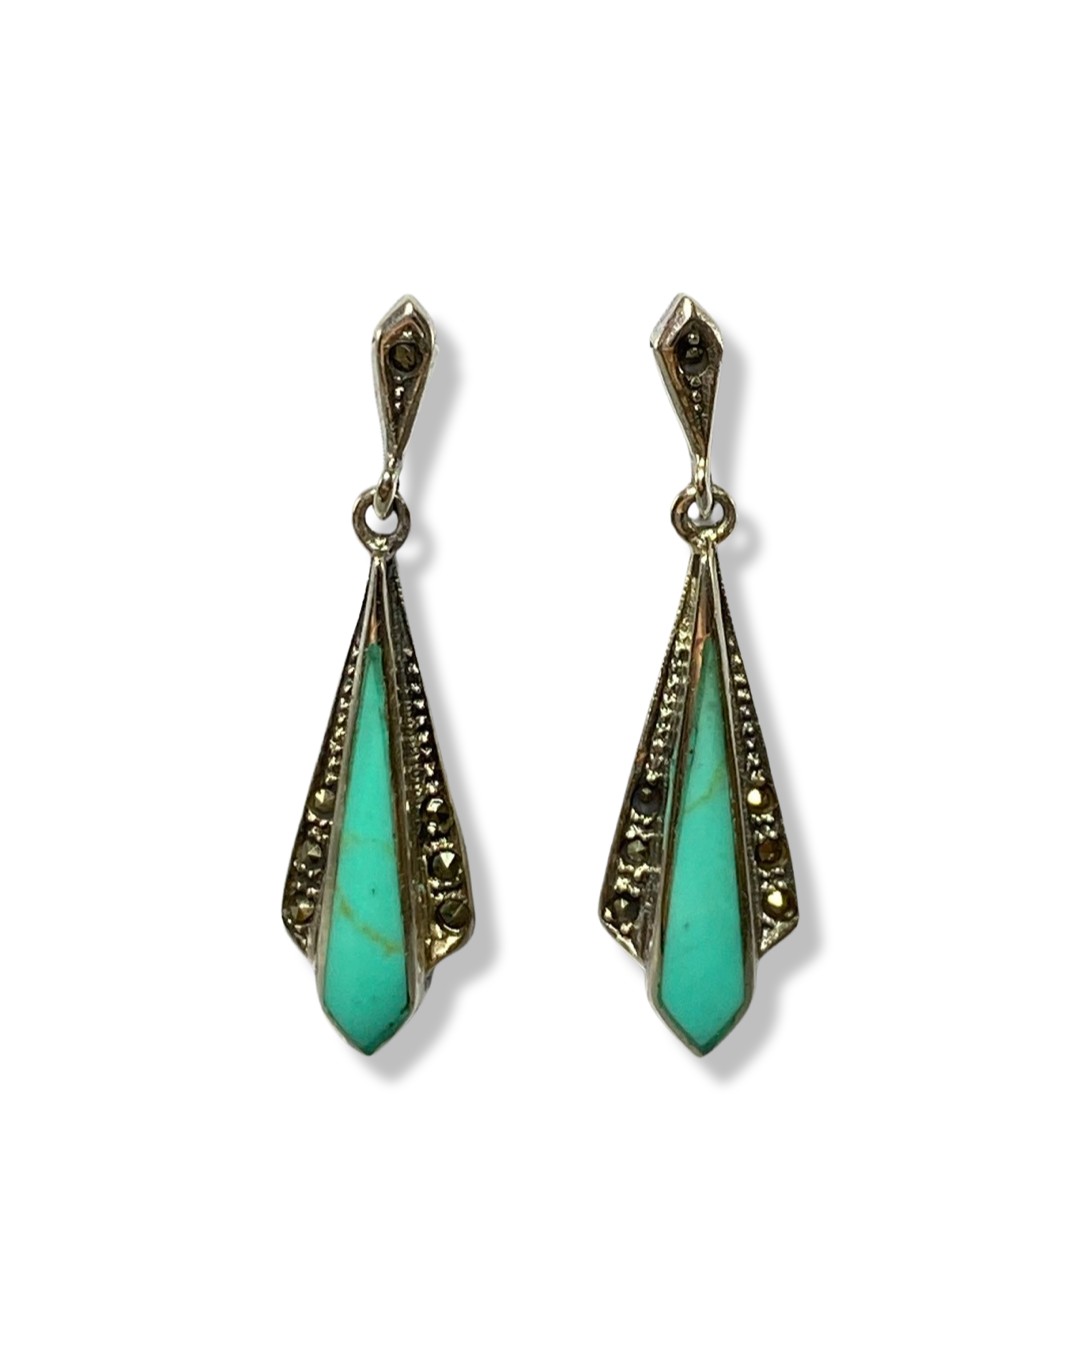 Pair of silver, Turquoise and marcasite drop earrings weighing 4.14 grams measuring 3.5cm in length